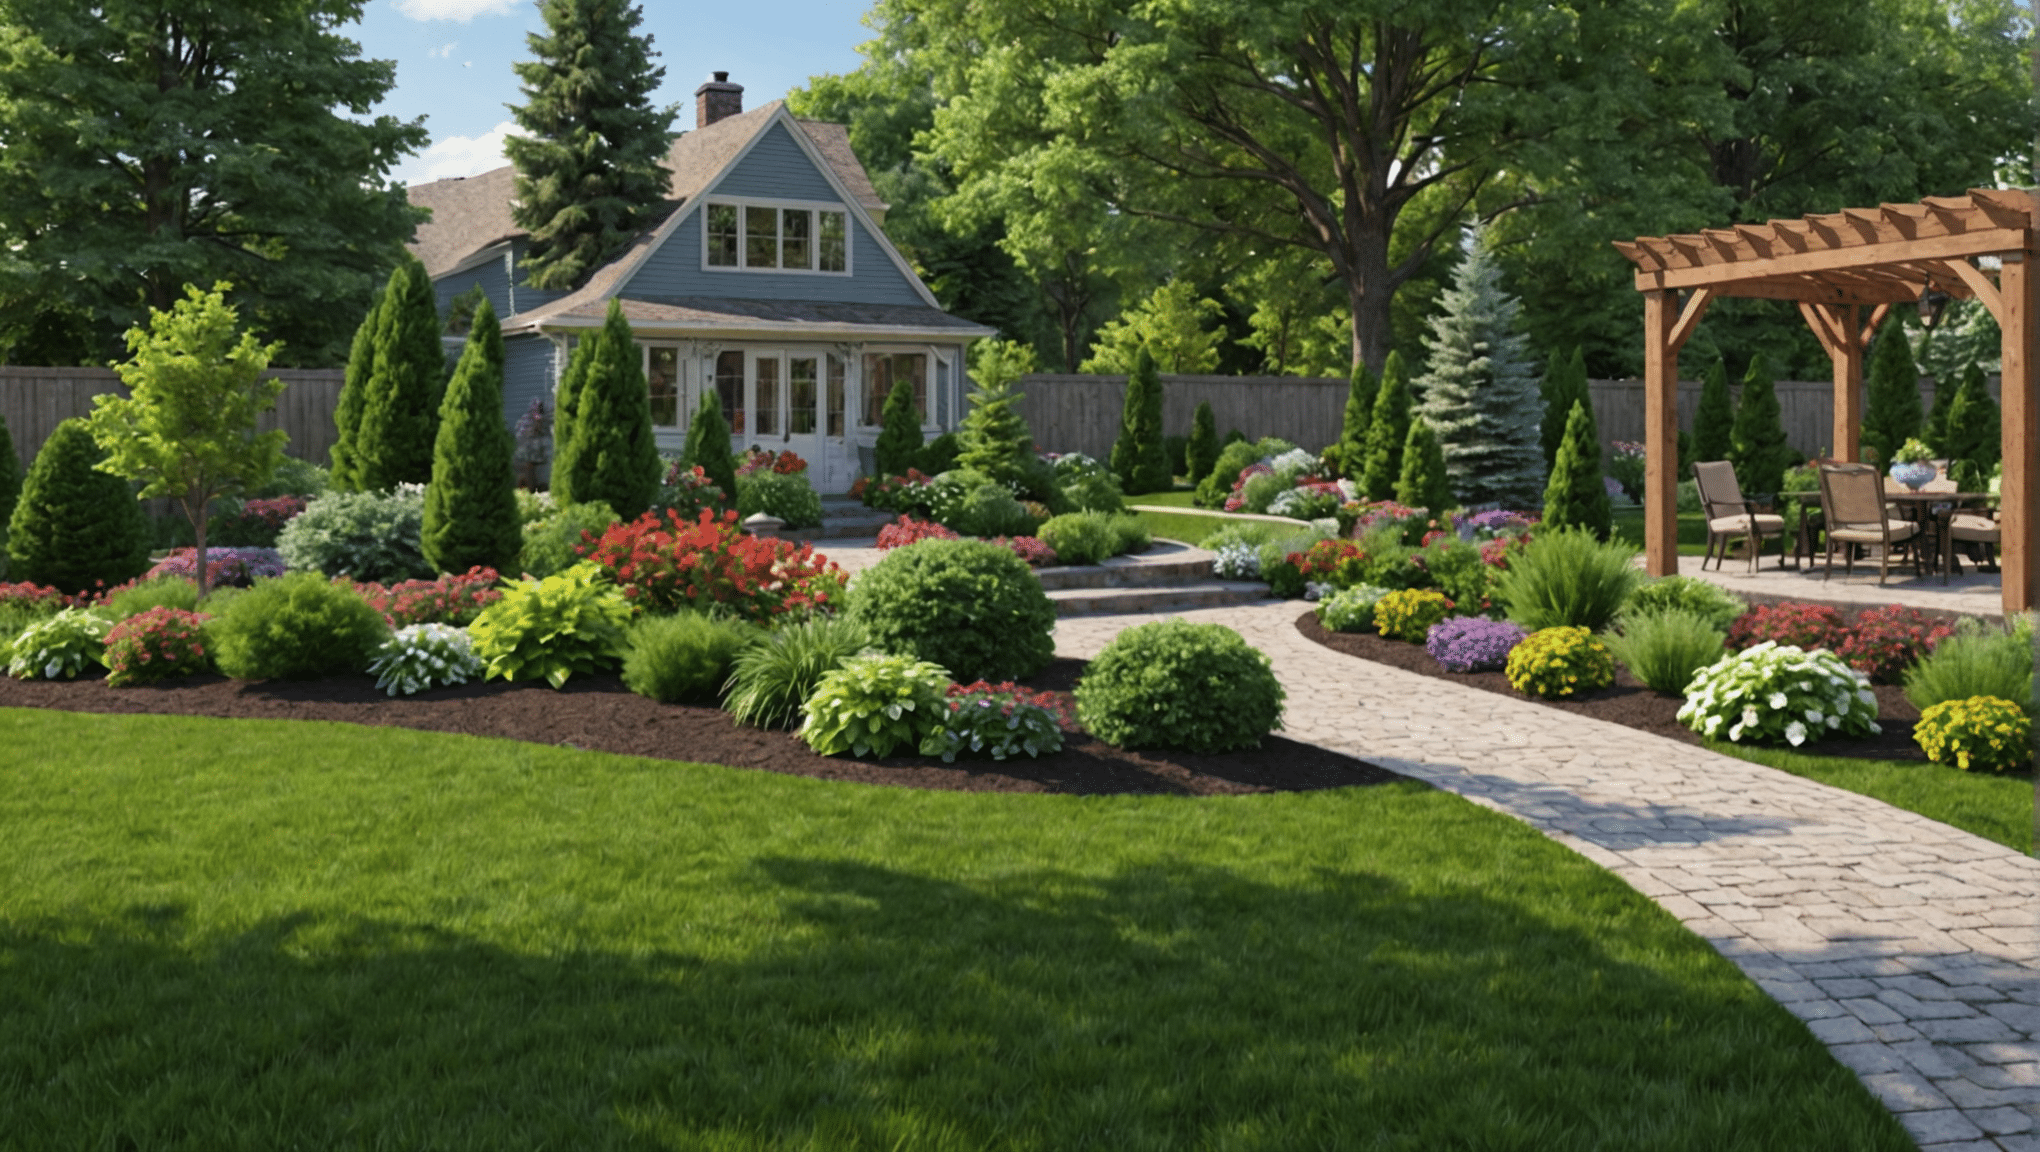 discover how landscaping inspiration can be used to create a tranquil outdoor sanctuary with our expert tips and ideas.